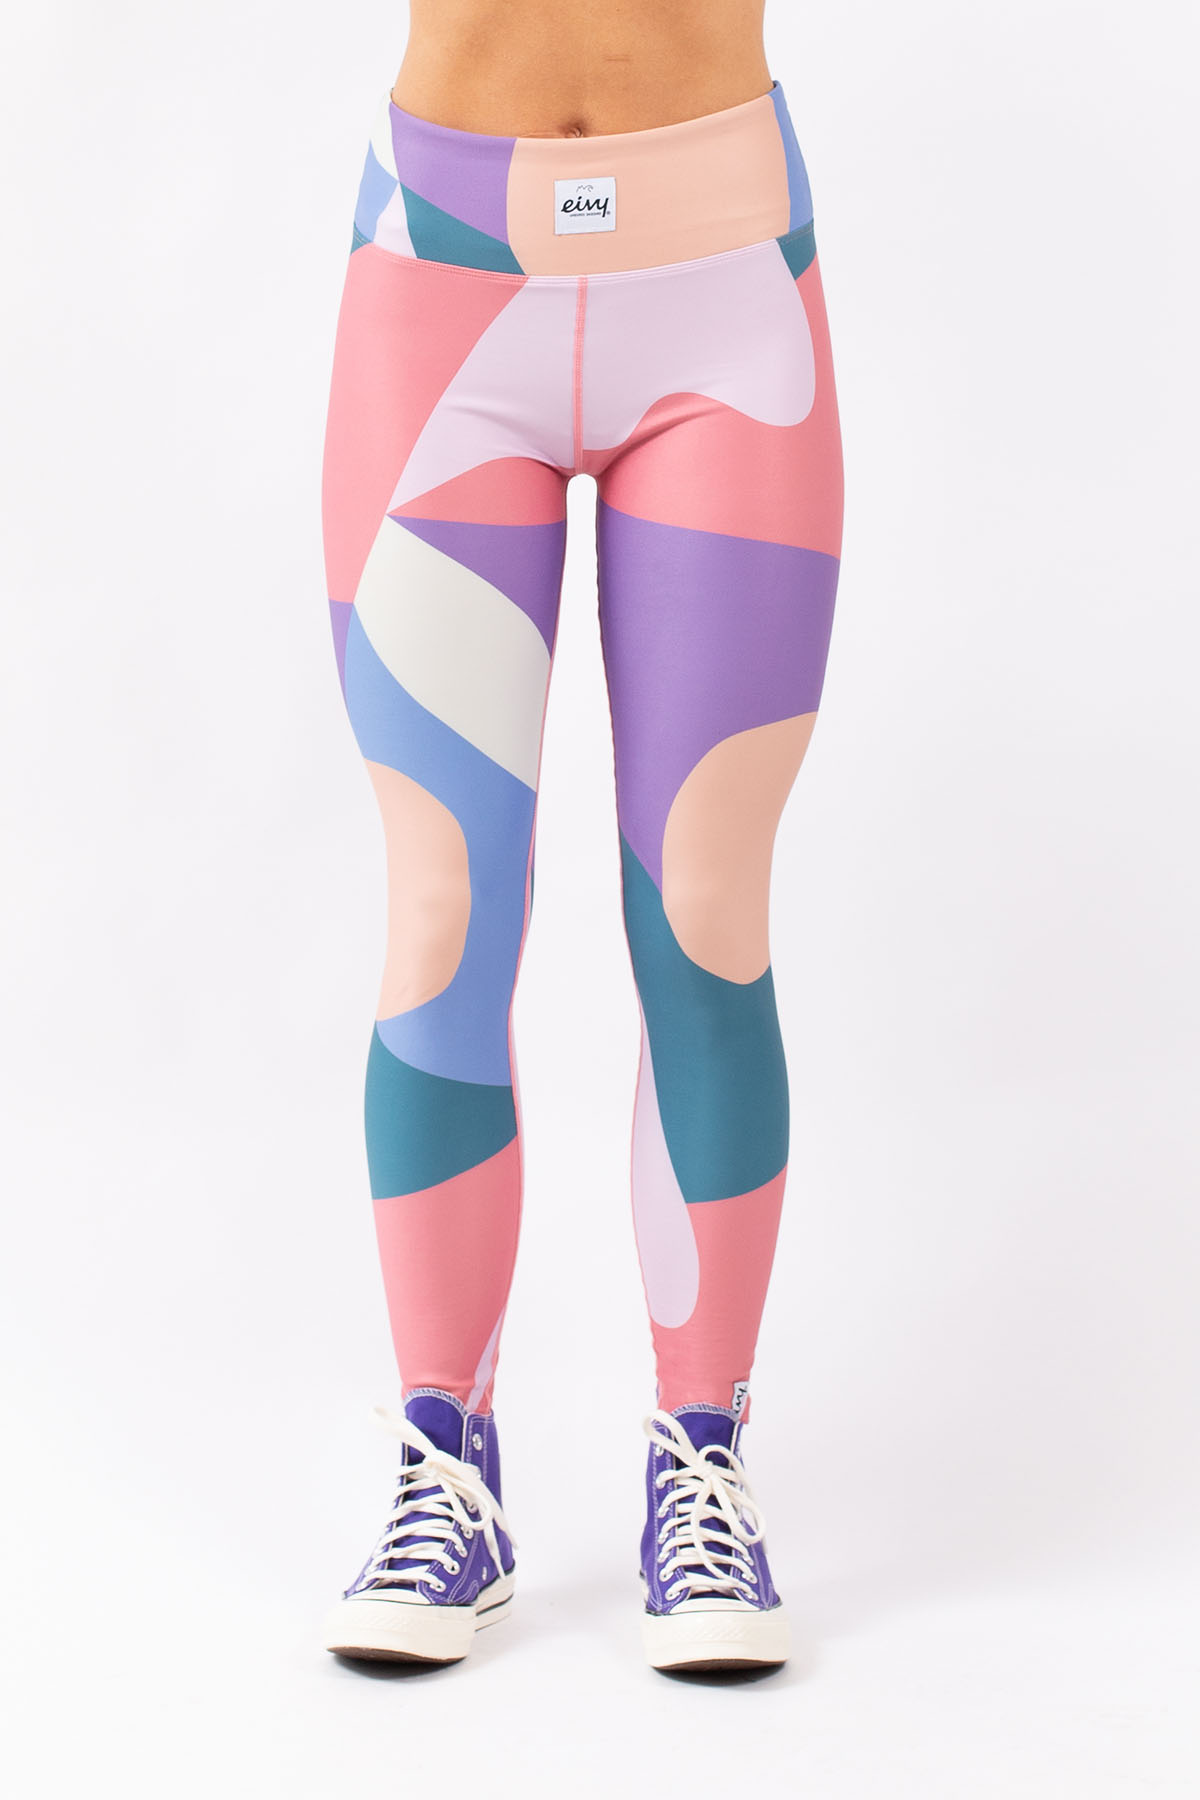 Icecold Tights - Abstract Shapes | L